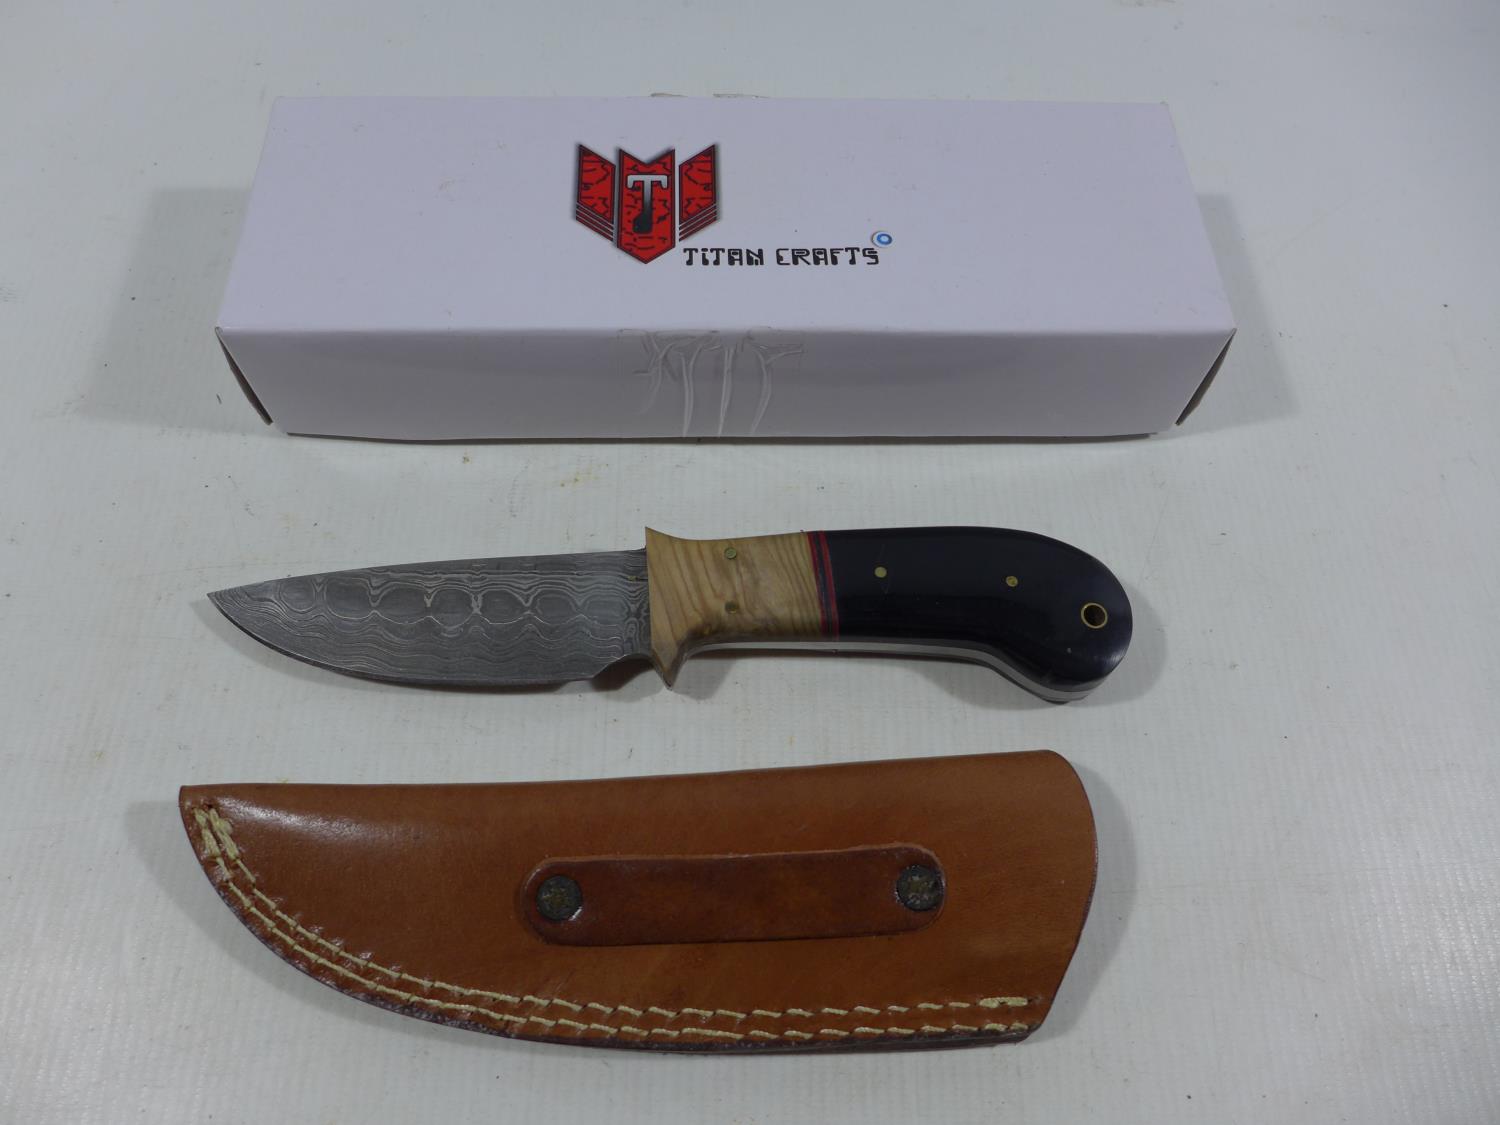 A BOXED TITAN CRAFTS KNIFE AND SCABBARD, 11CM DAMASCUS BLADE